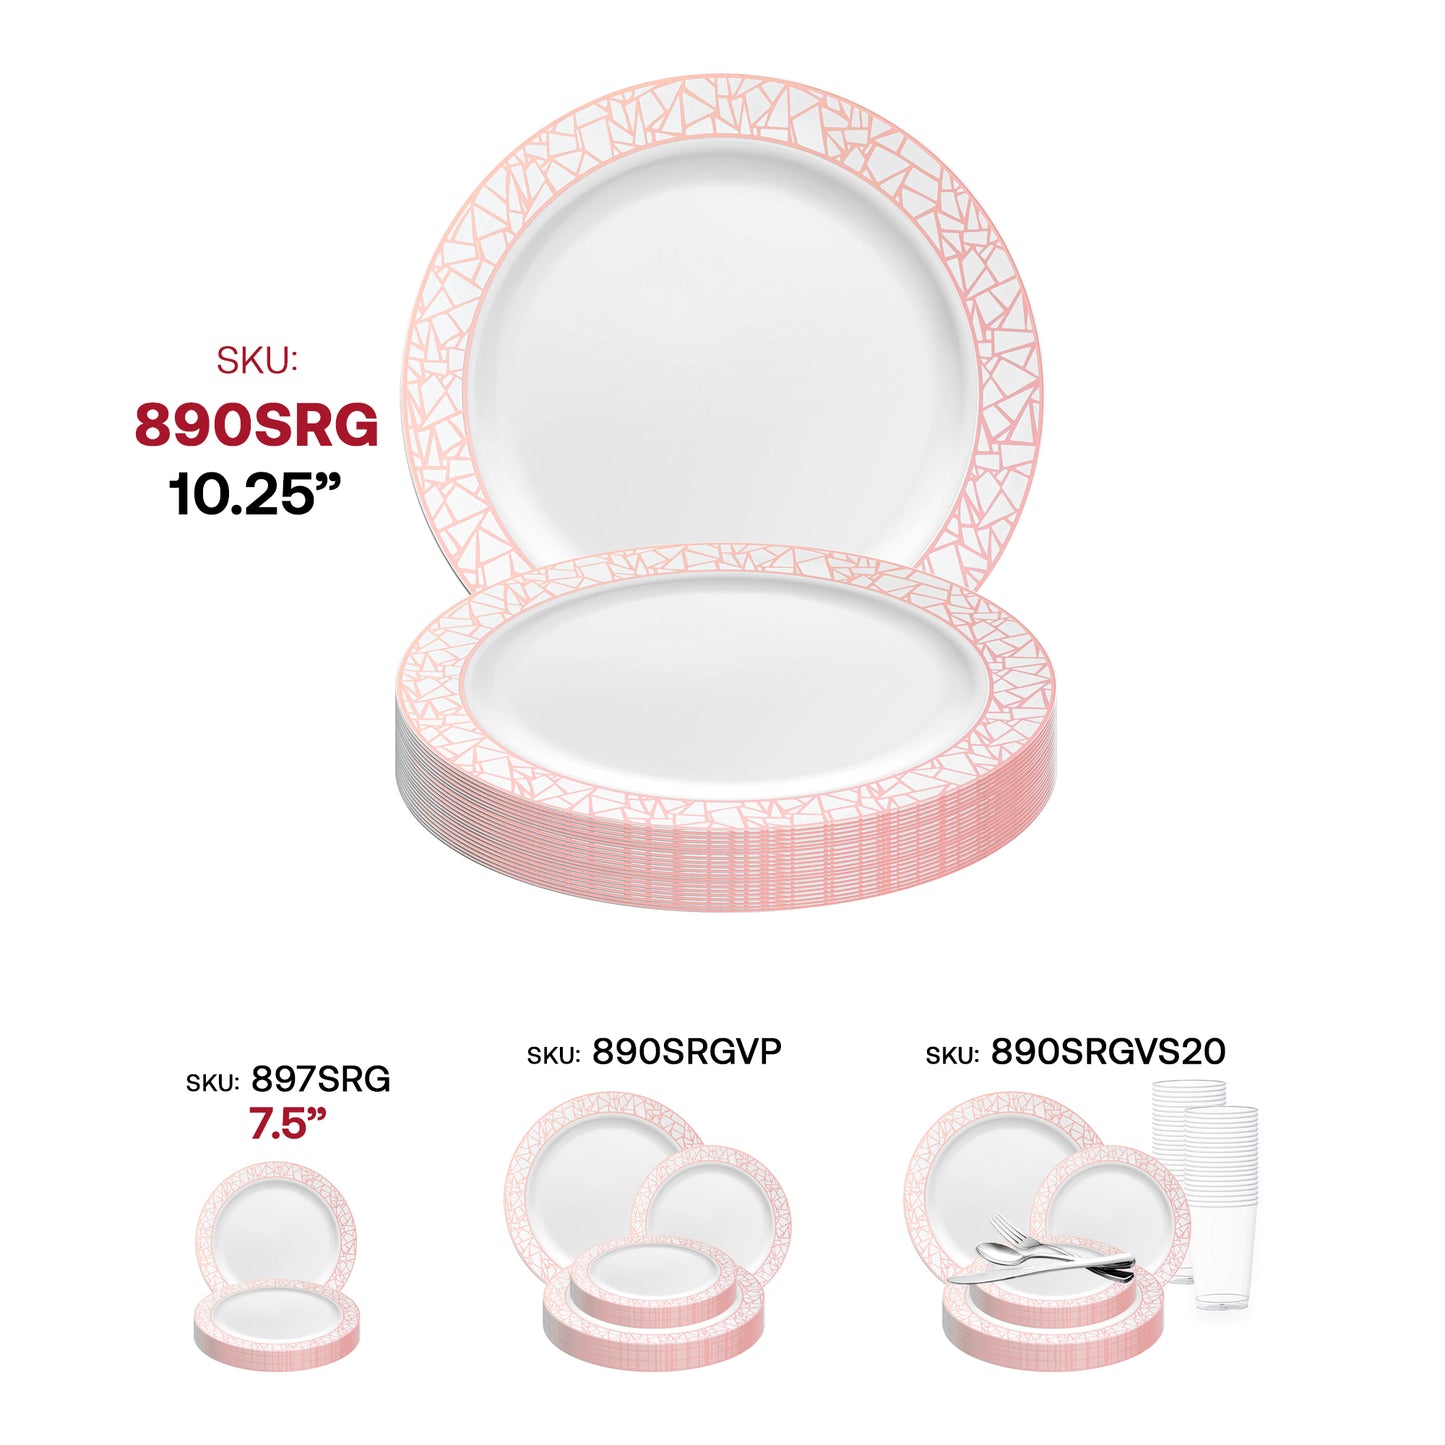 White with Silver and Rose Gold Mosaic Rim Round Disposable Plastic Dinner Plates (10.25") SKU | The Kaya Collection